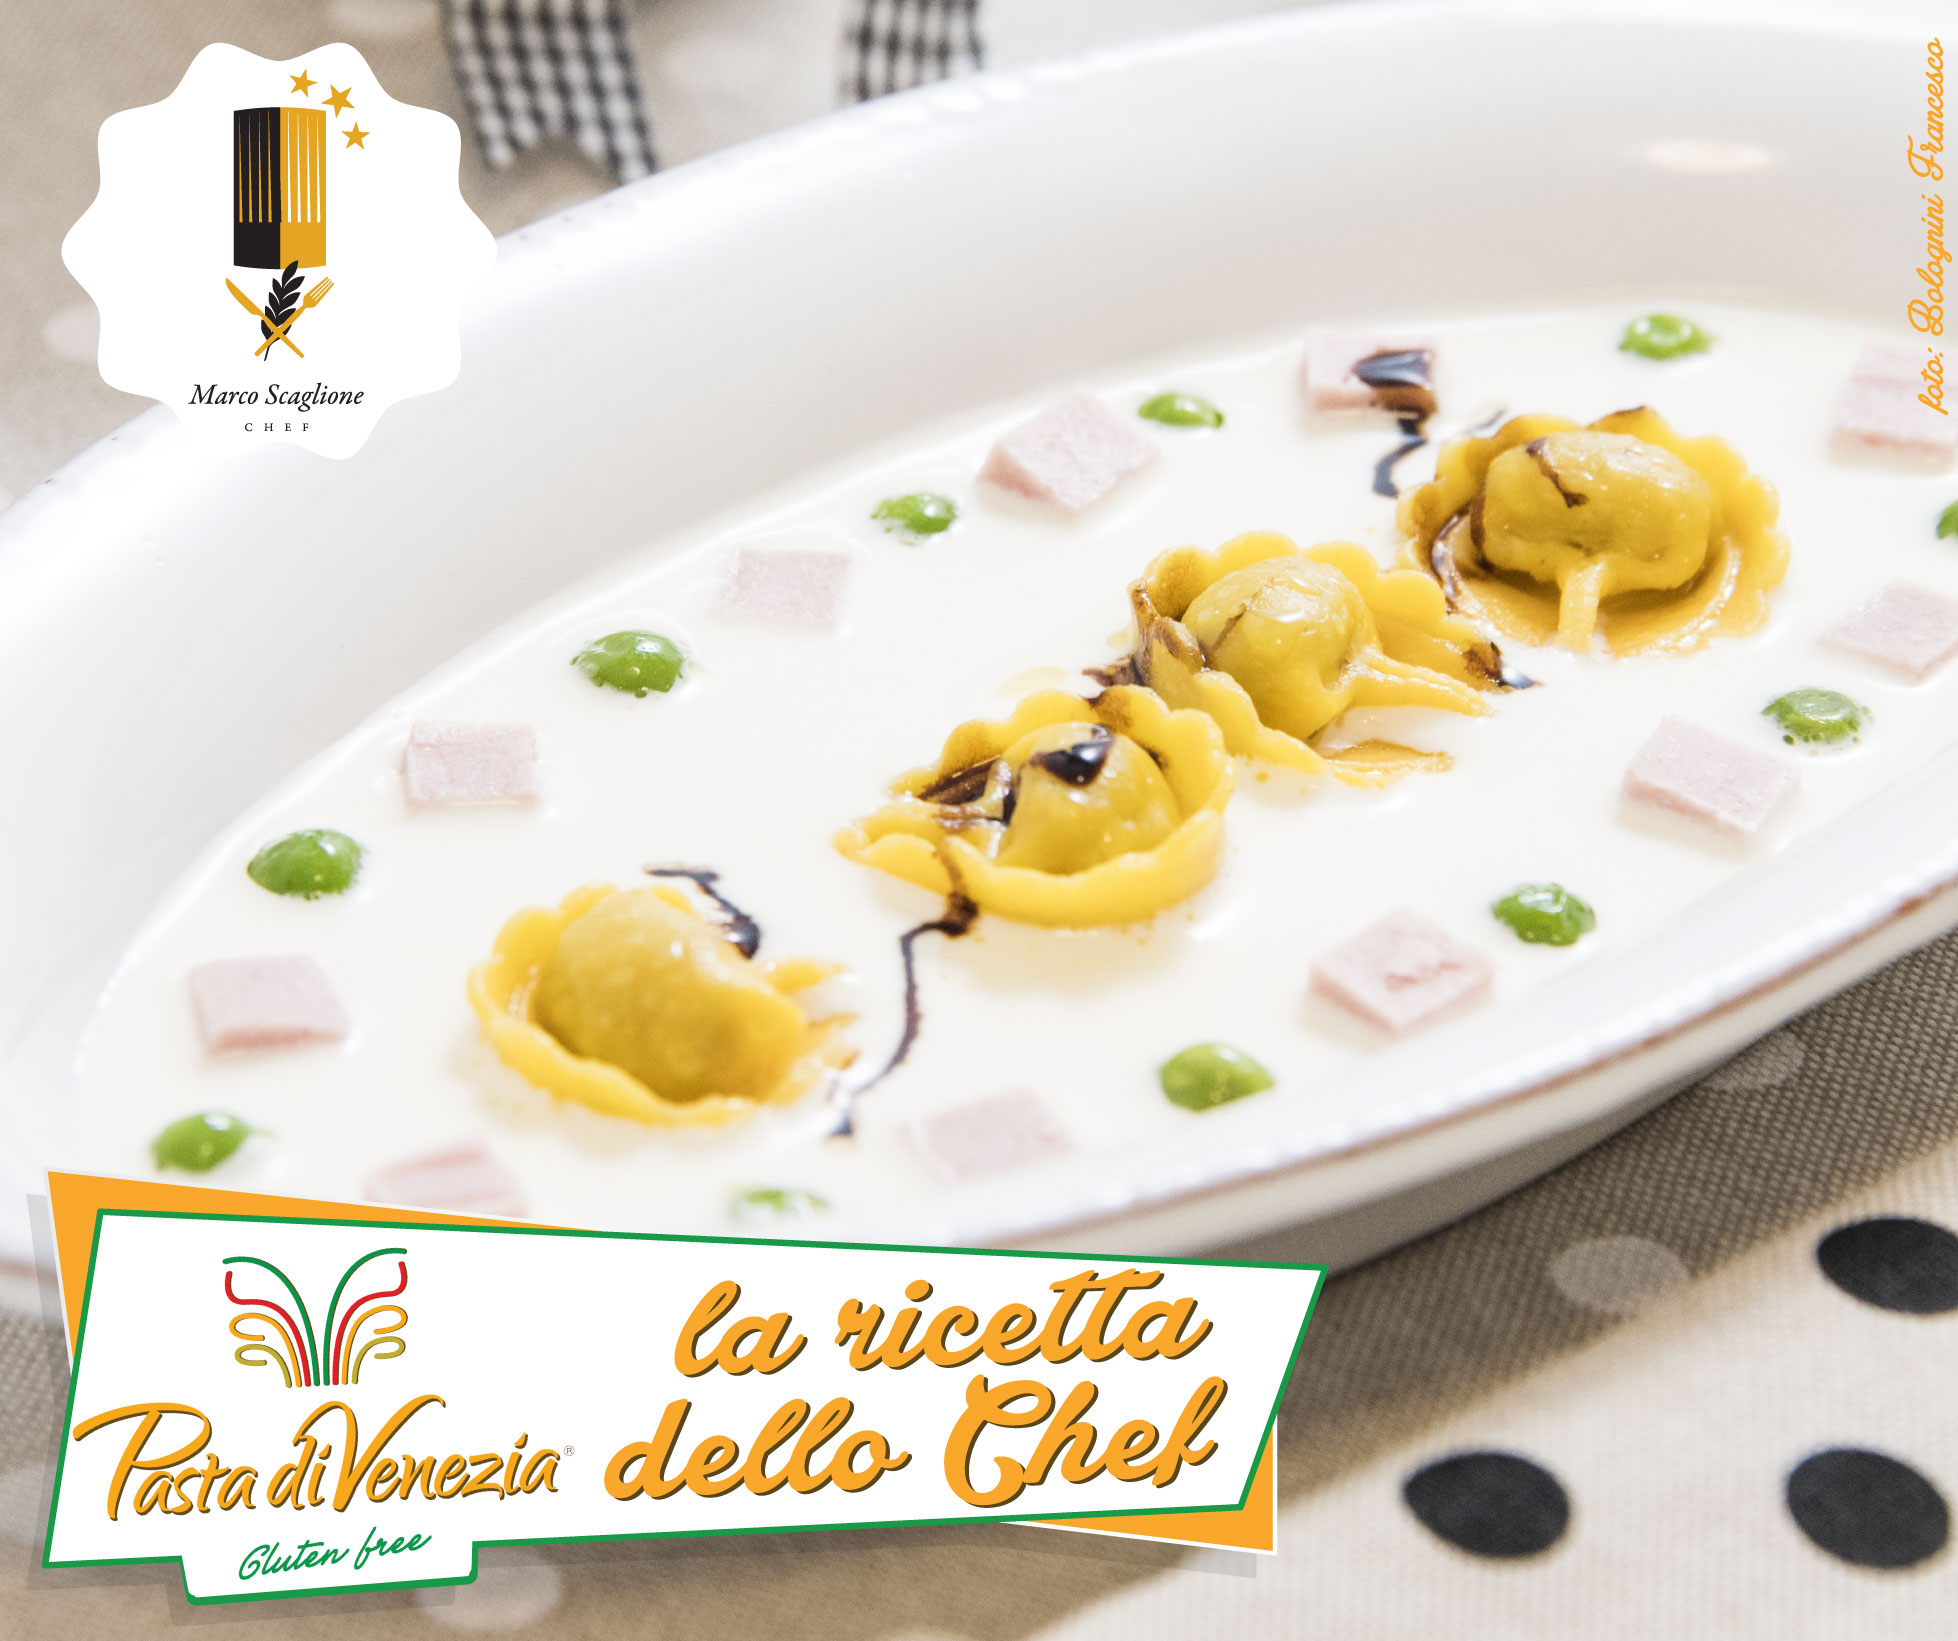 Cappelletti uncooked gluten-free with parmesan cream, steamed peas and cubed ham flavored with rosemary